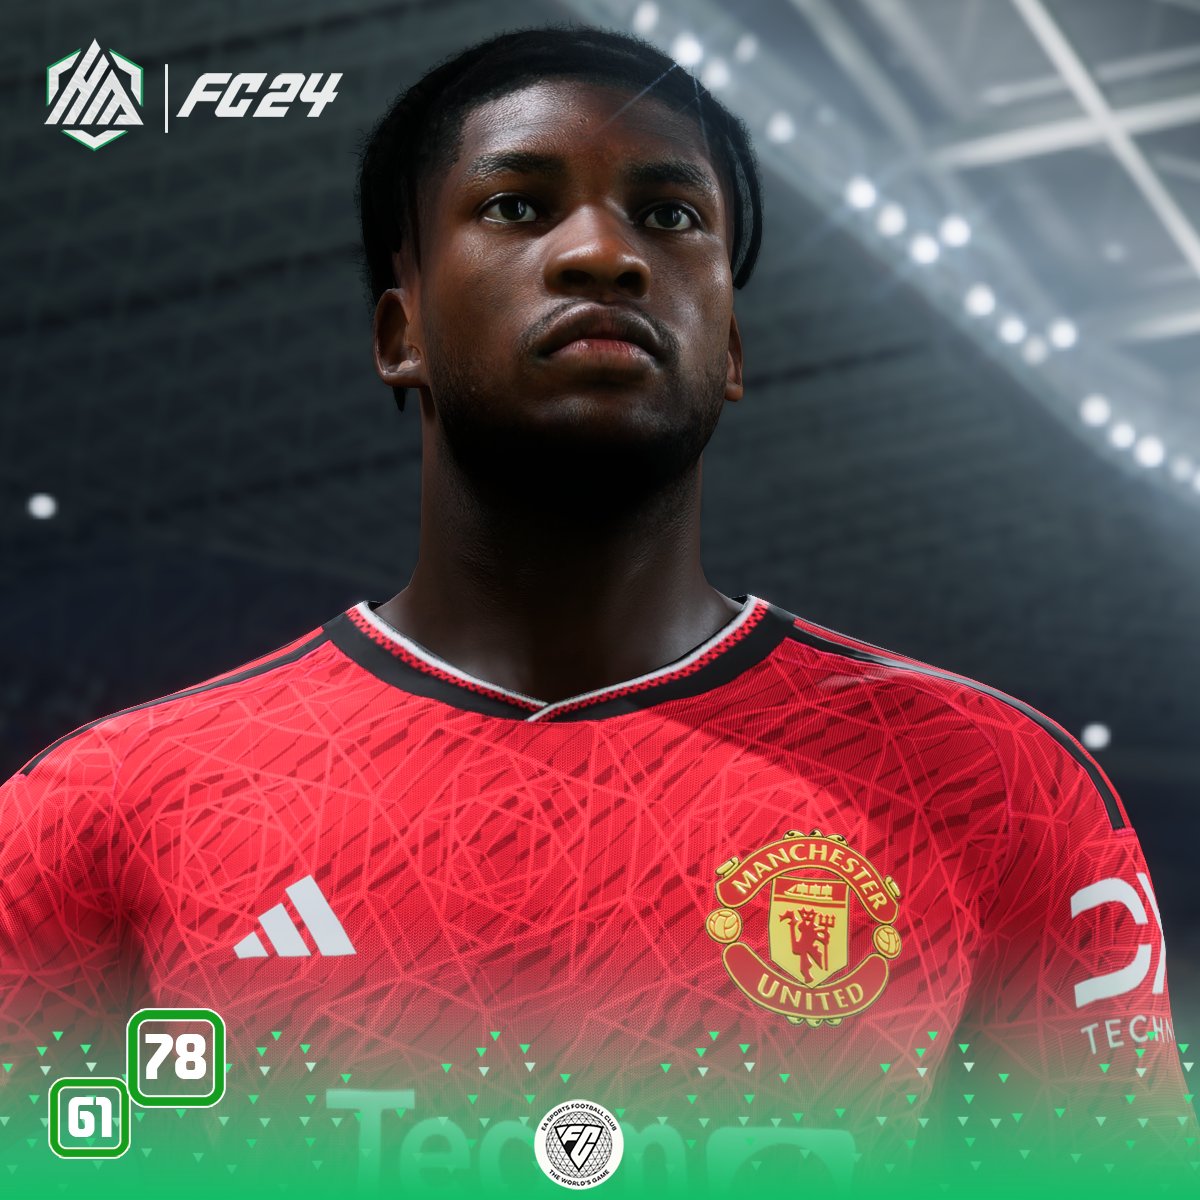 🌟One of the most exciting Hidden Gems This season !! 18 years with Good Potential in #FC24🤩 

Willy Kambwala #ManchesterUnited 's Gem 💎 

Release : Today ✅🤙 

#EAFC24 #PremierLeague #RedDevils  #ManchesterDerbyWeek #ManchesterisRed